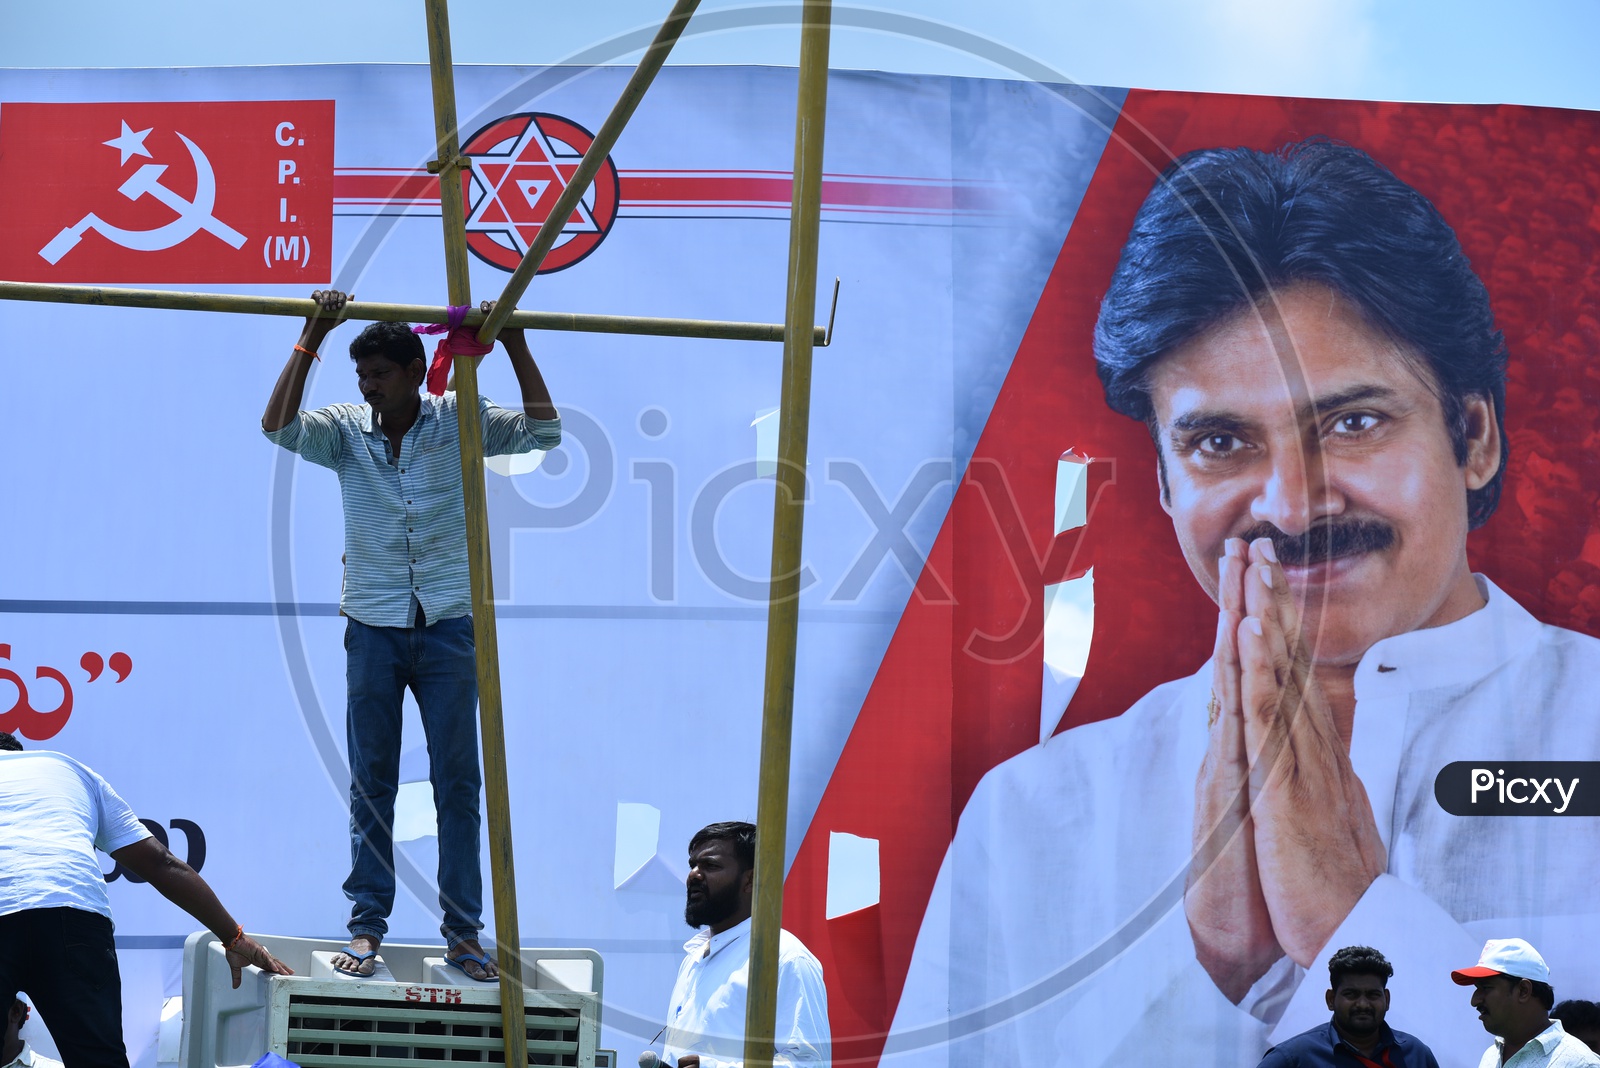 Men setting up the stage for Jana Sena party election campaign